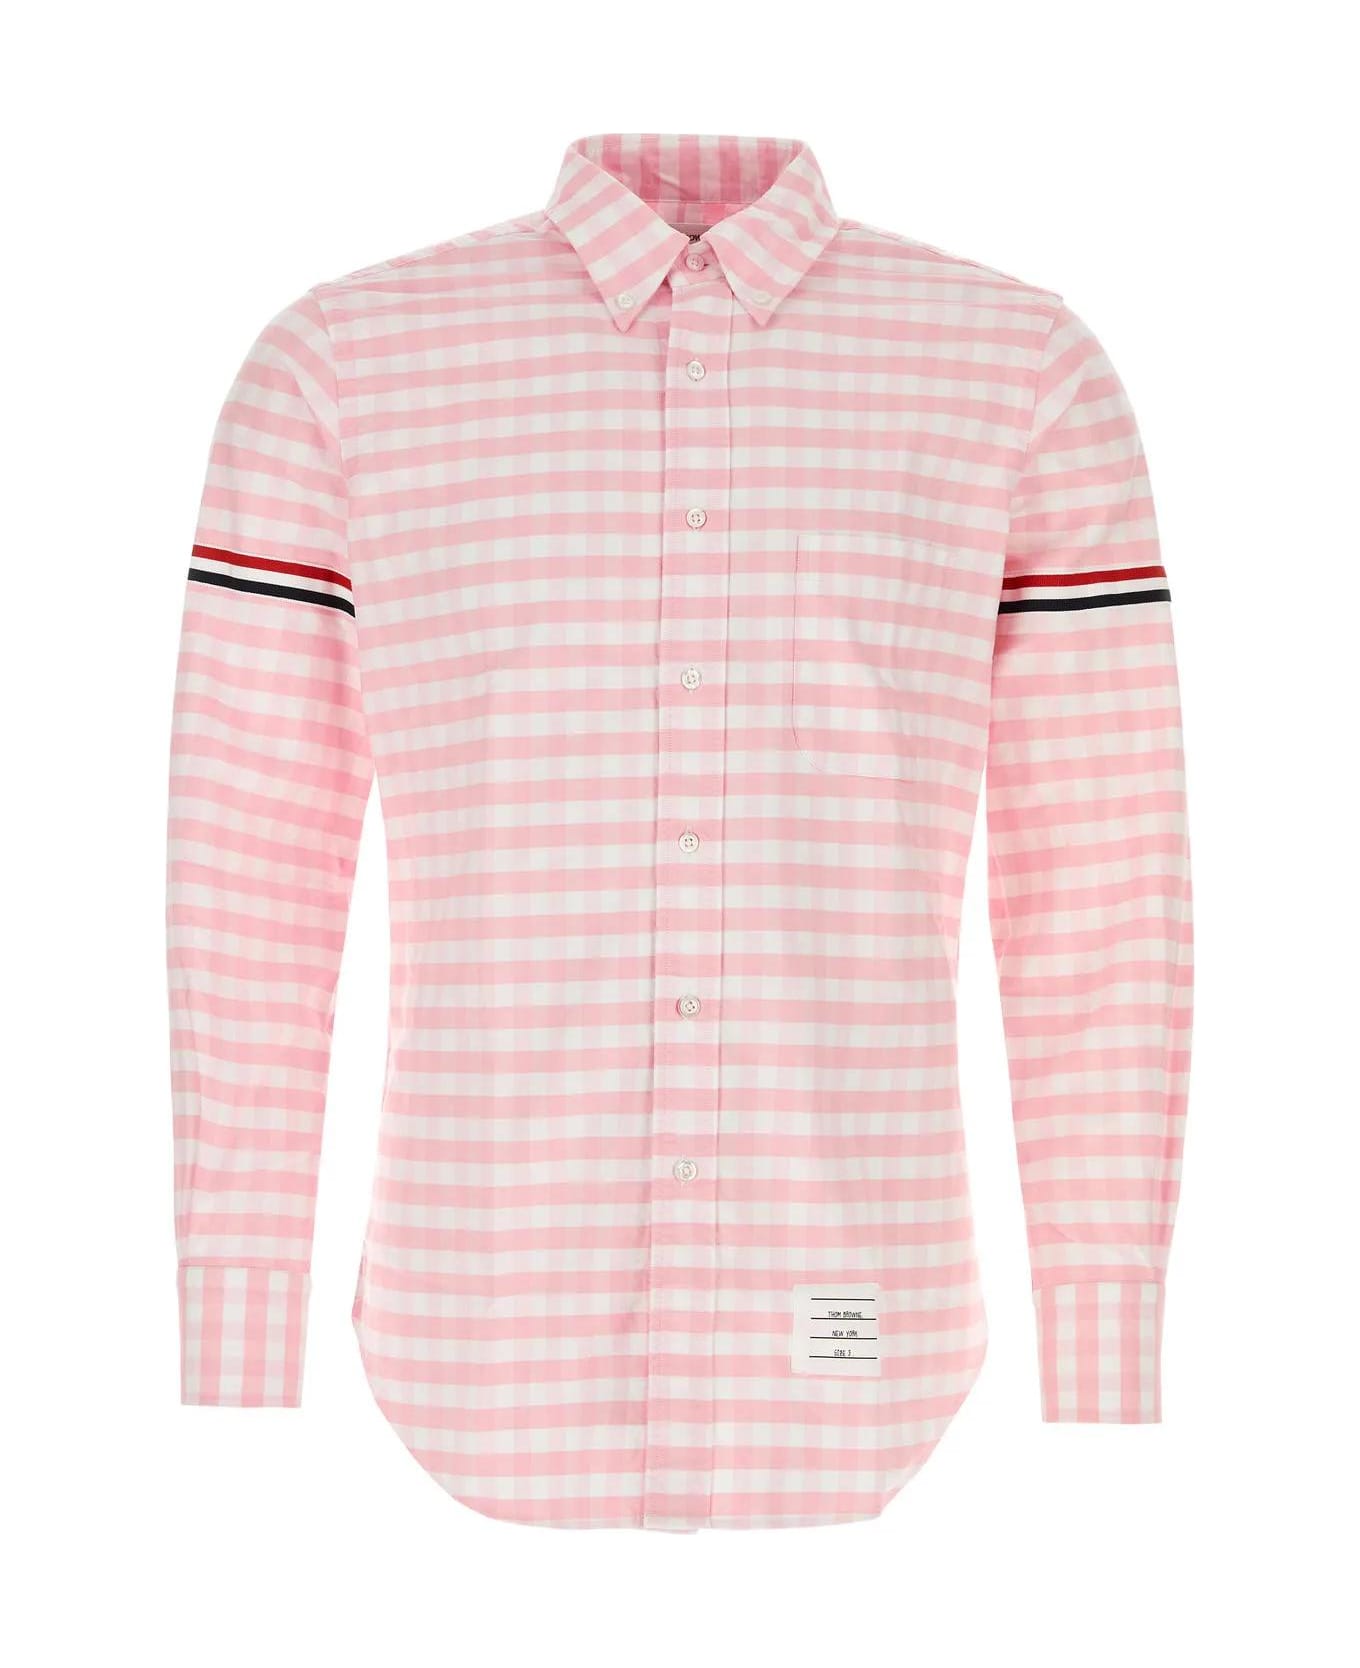 Thom Browne Embroidered Oxford Shirt - Pink